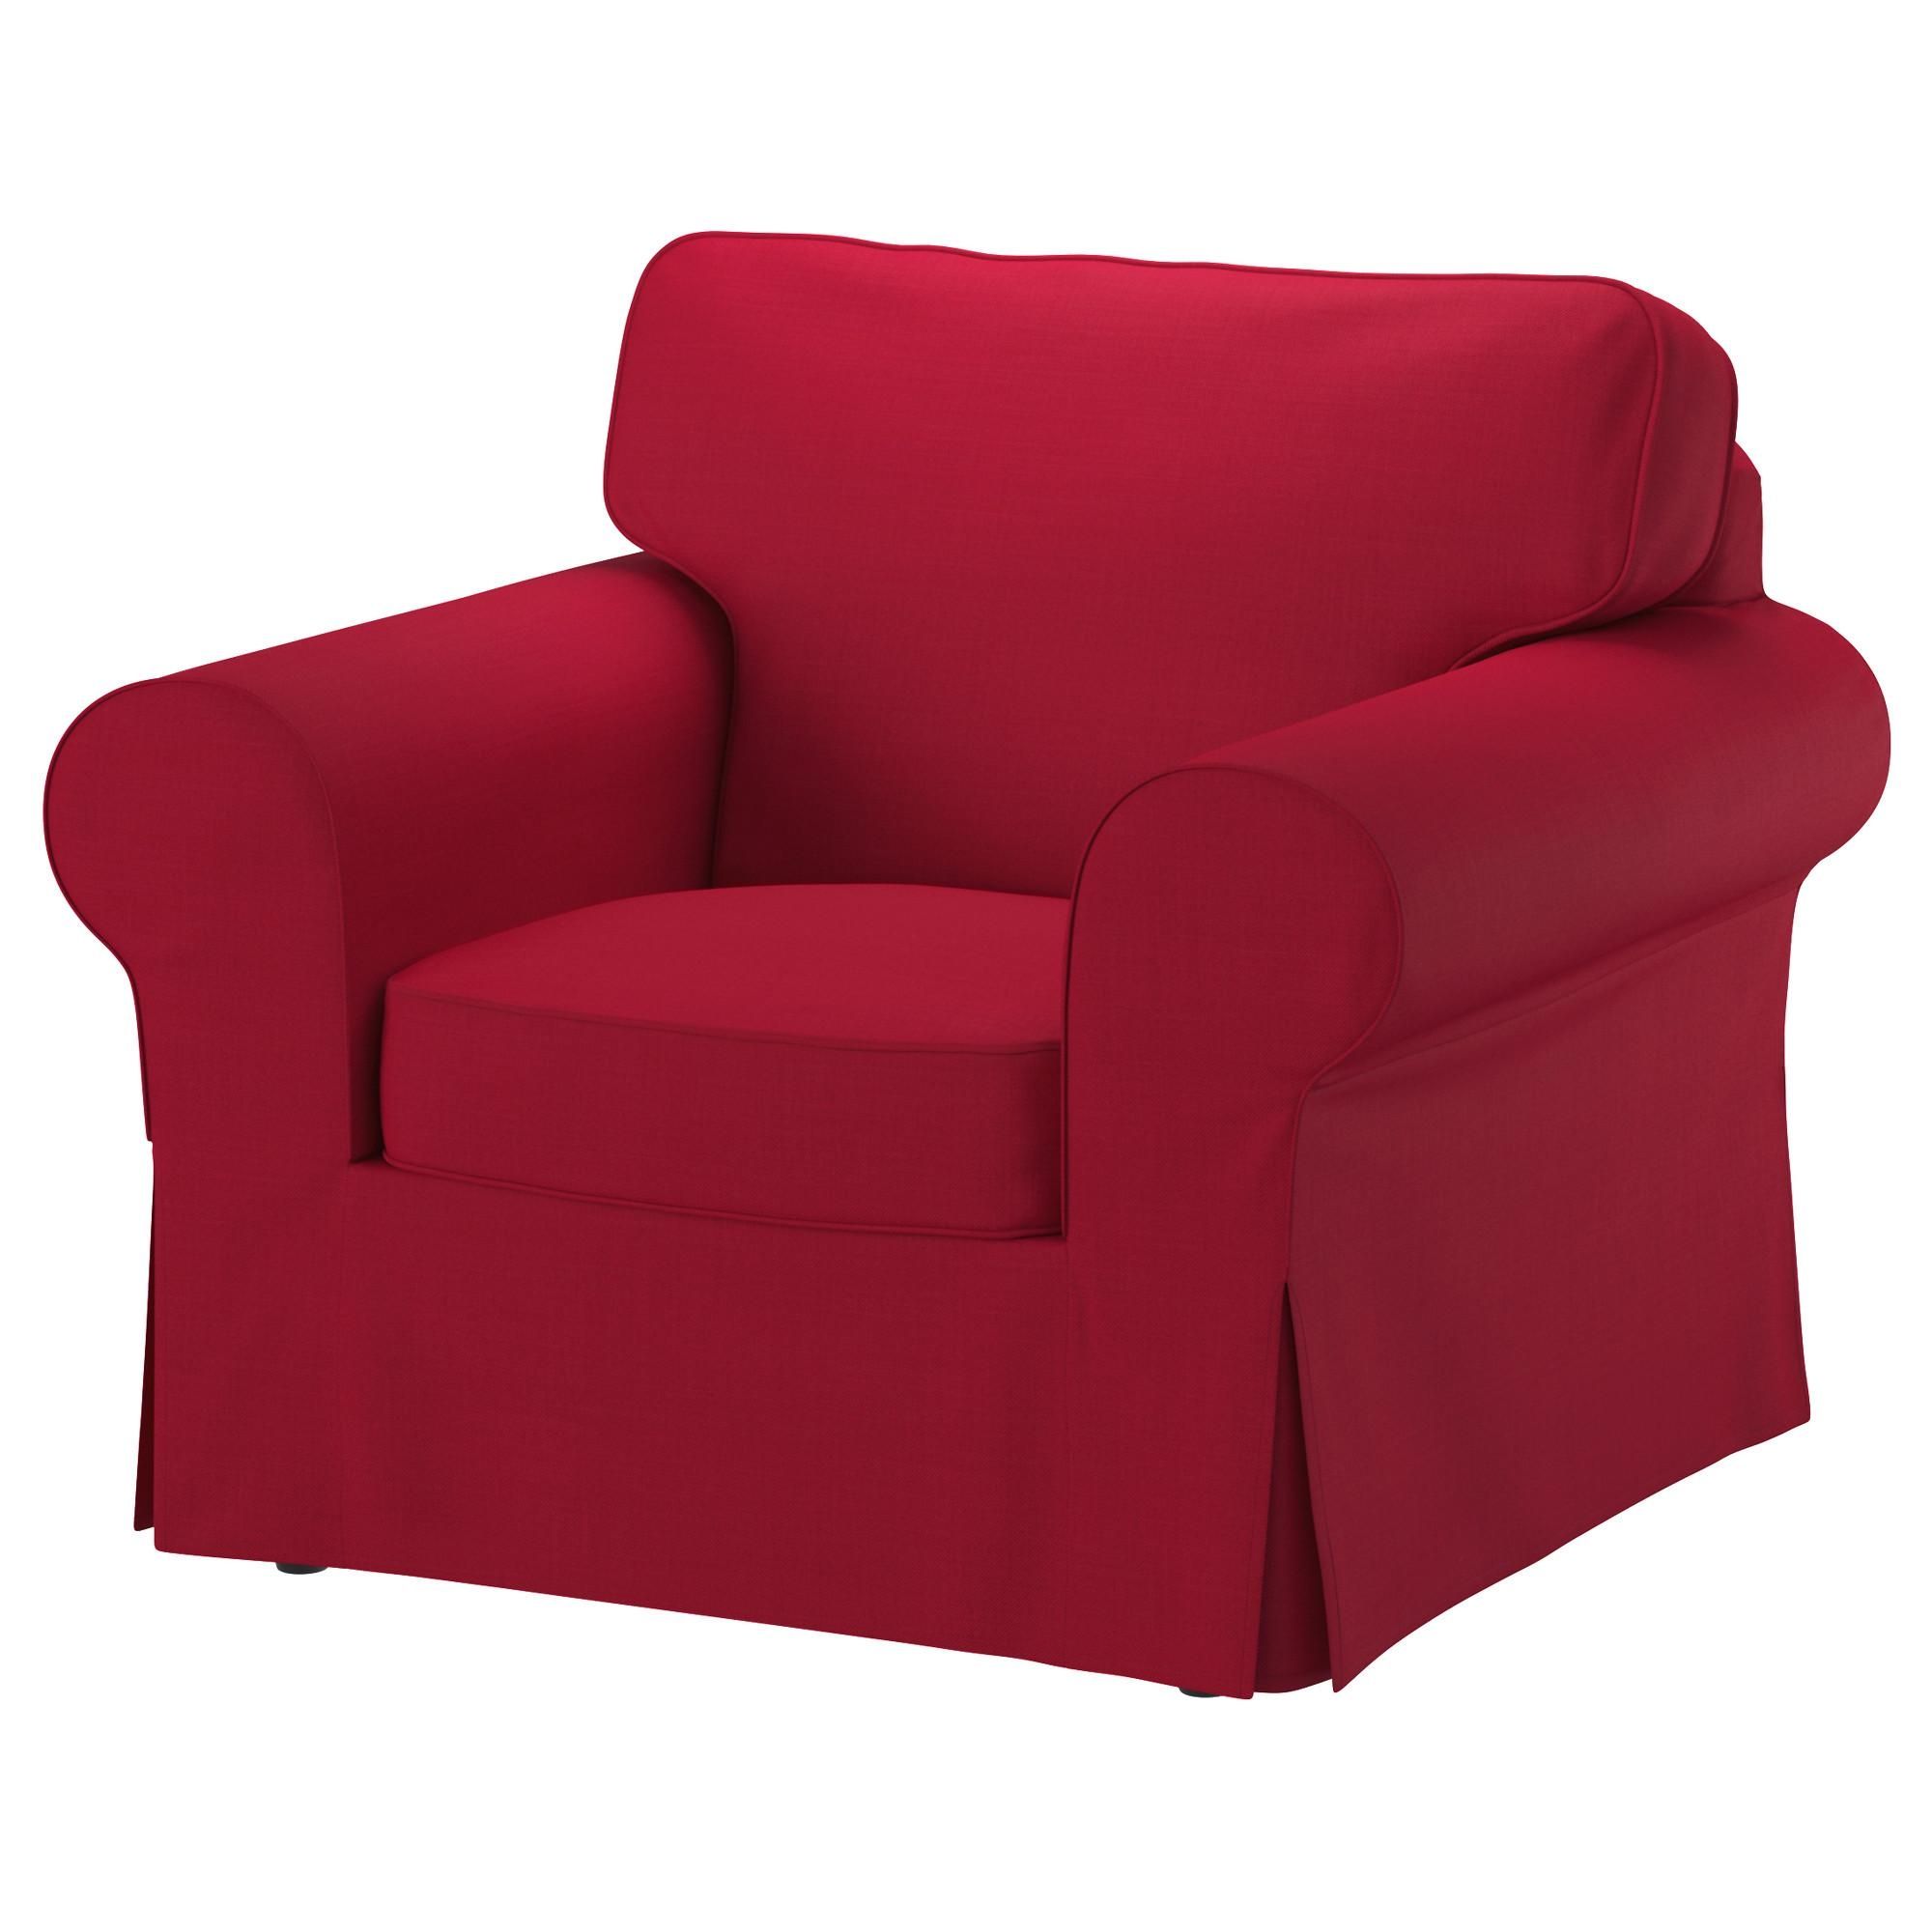 Furniture: Give Your Sofa Fresh New Look With Ikea Ektorp Chair In Sofa With Chairs (View 20 of 20)